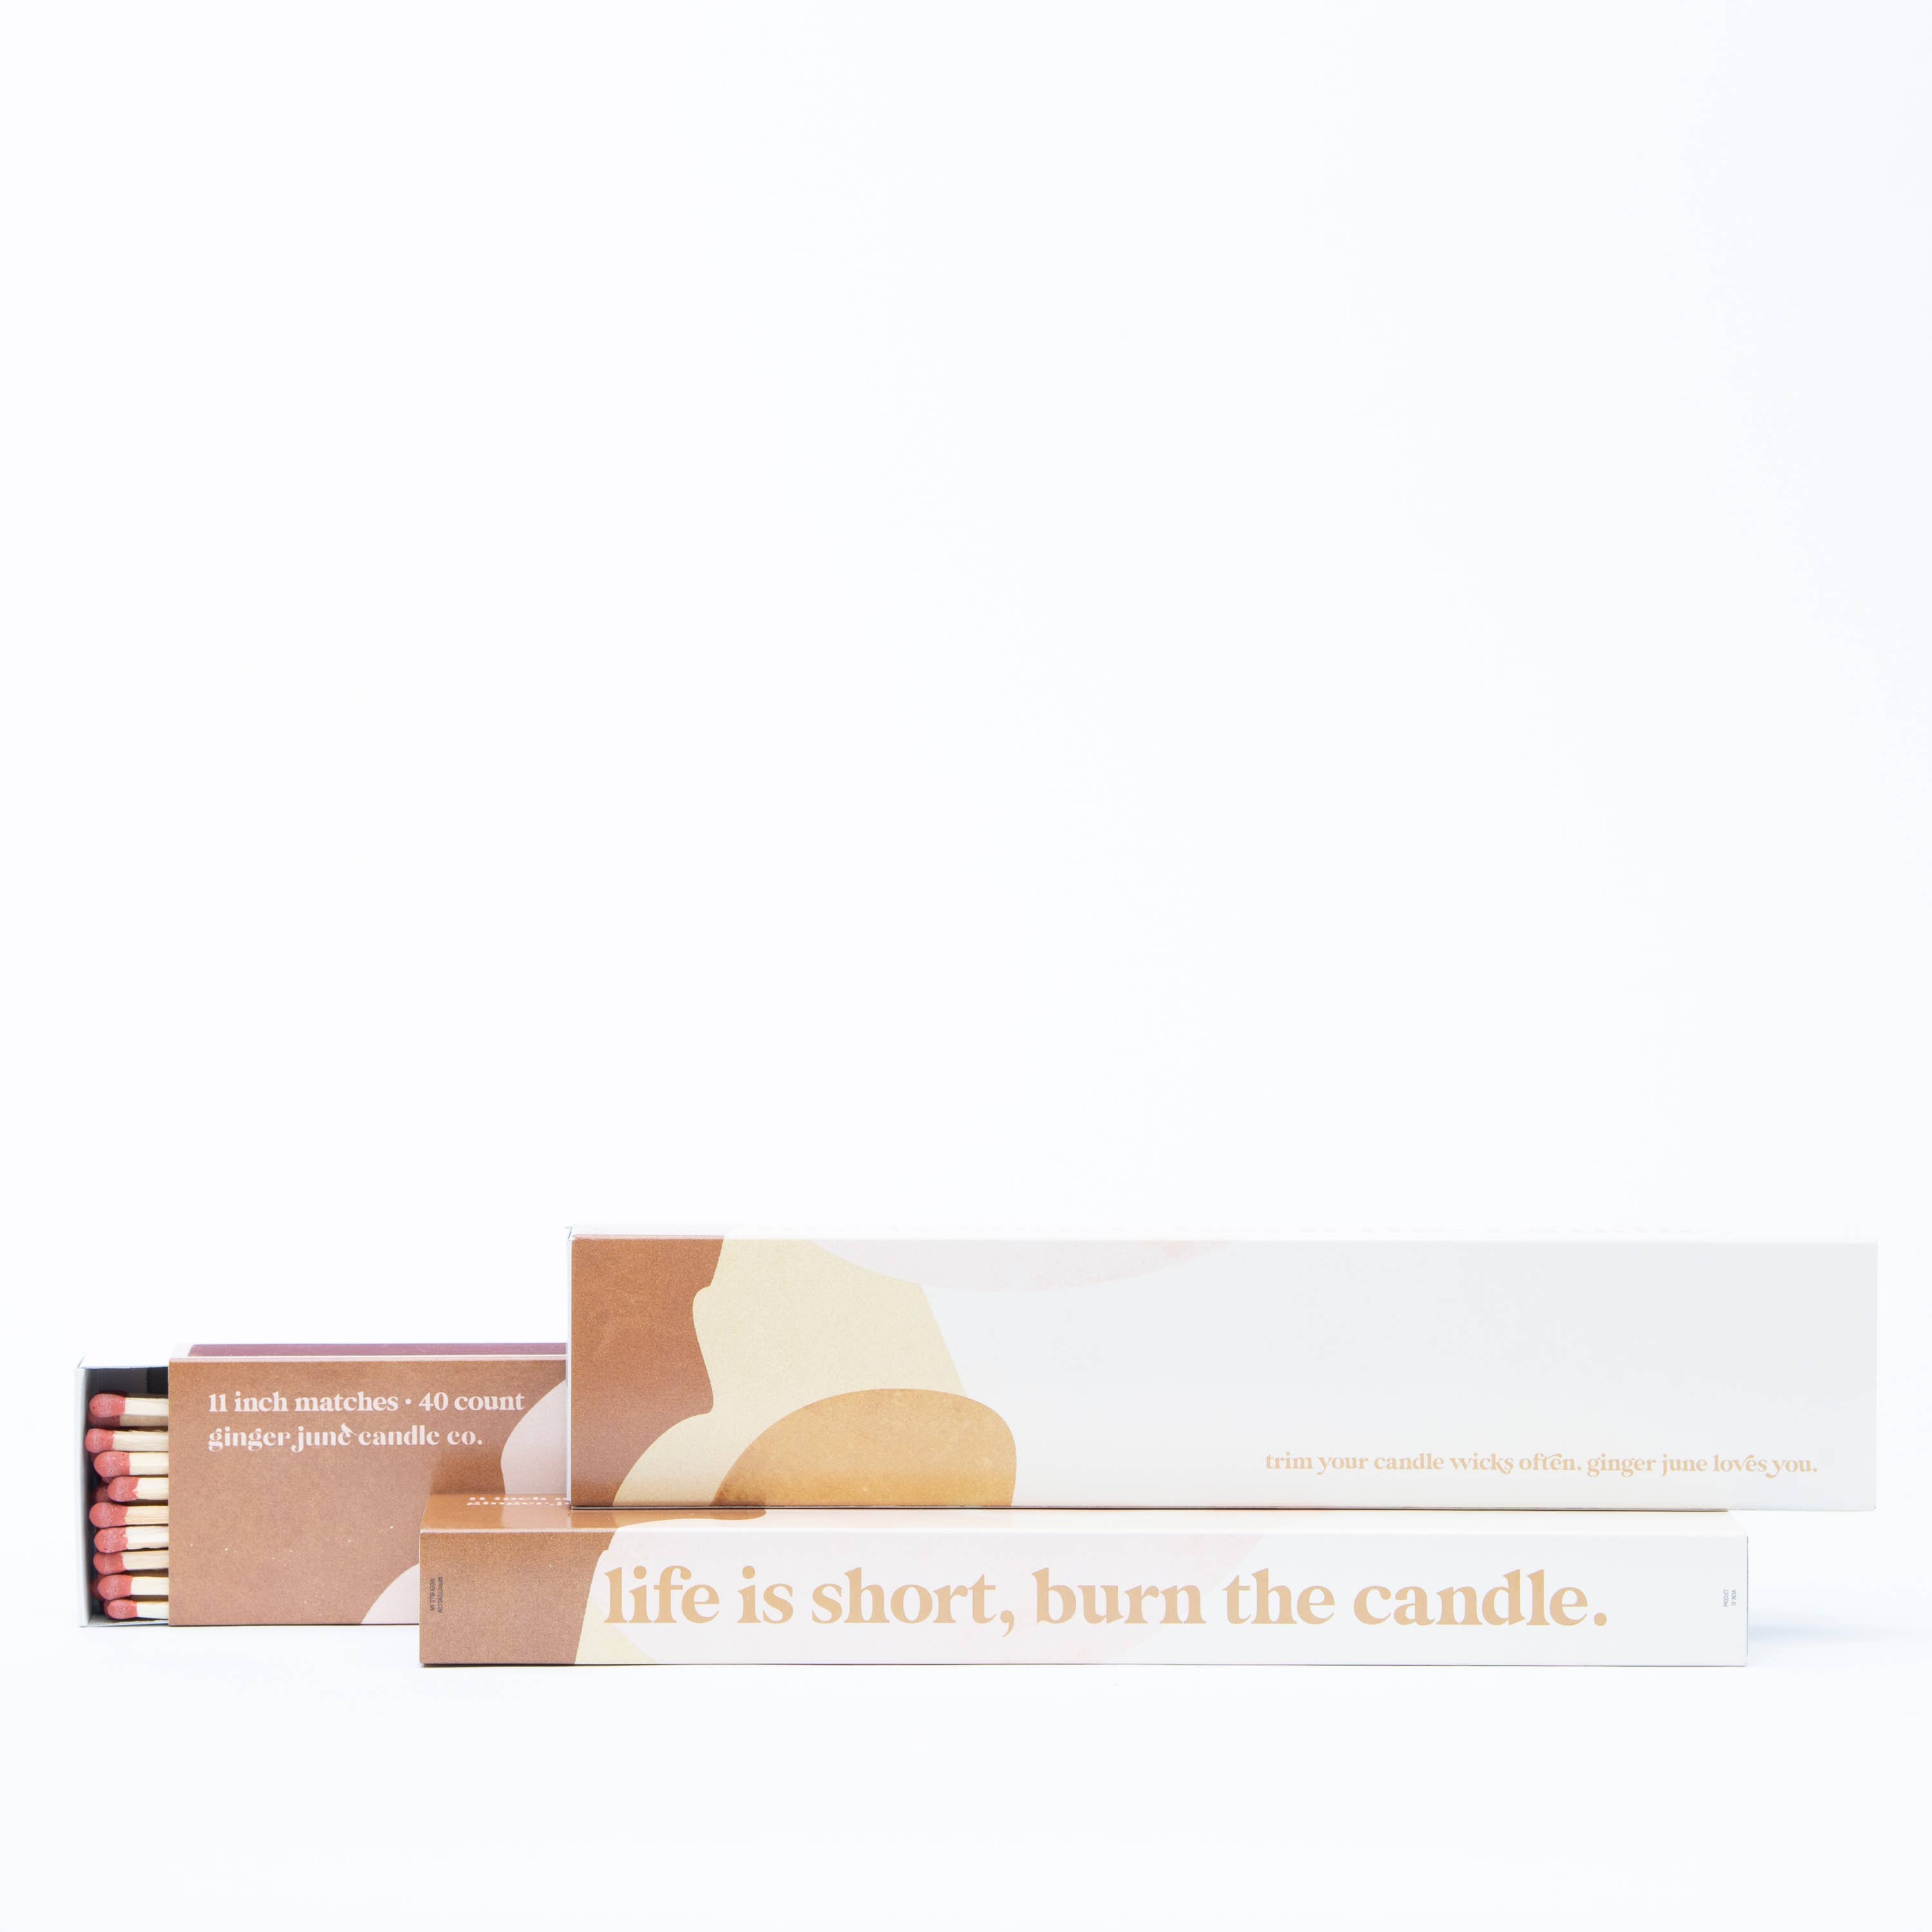 Ginger June Candle Co. - LIFE'S SHORT, BURN THE CANDLE • XL fireplace matches